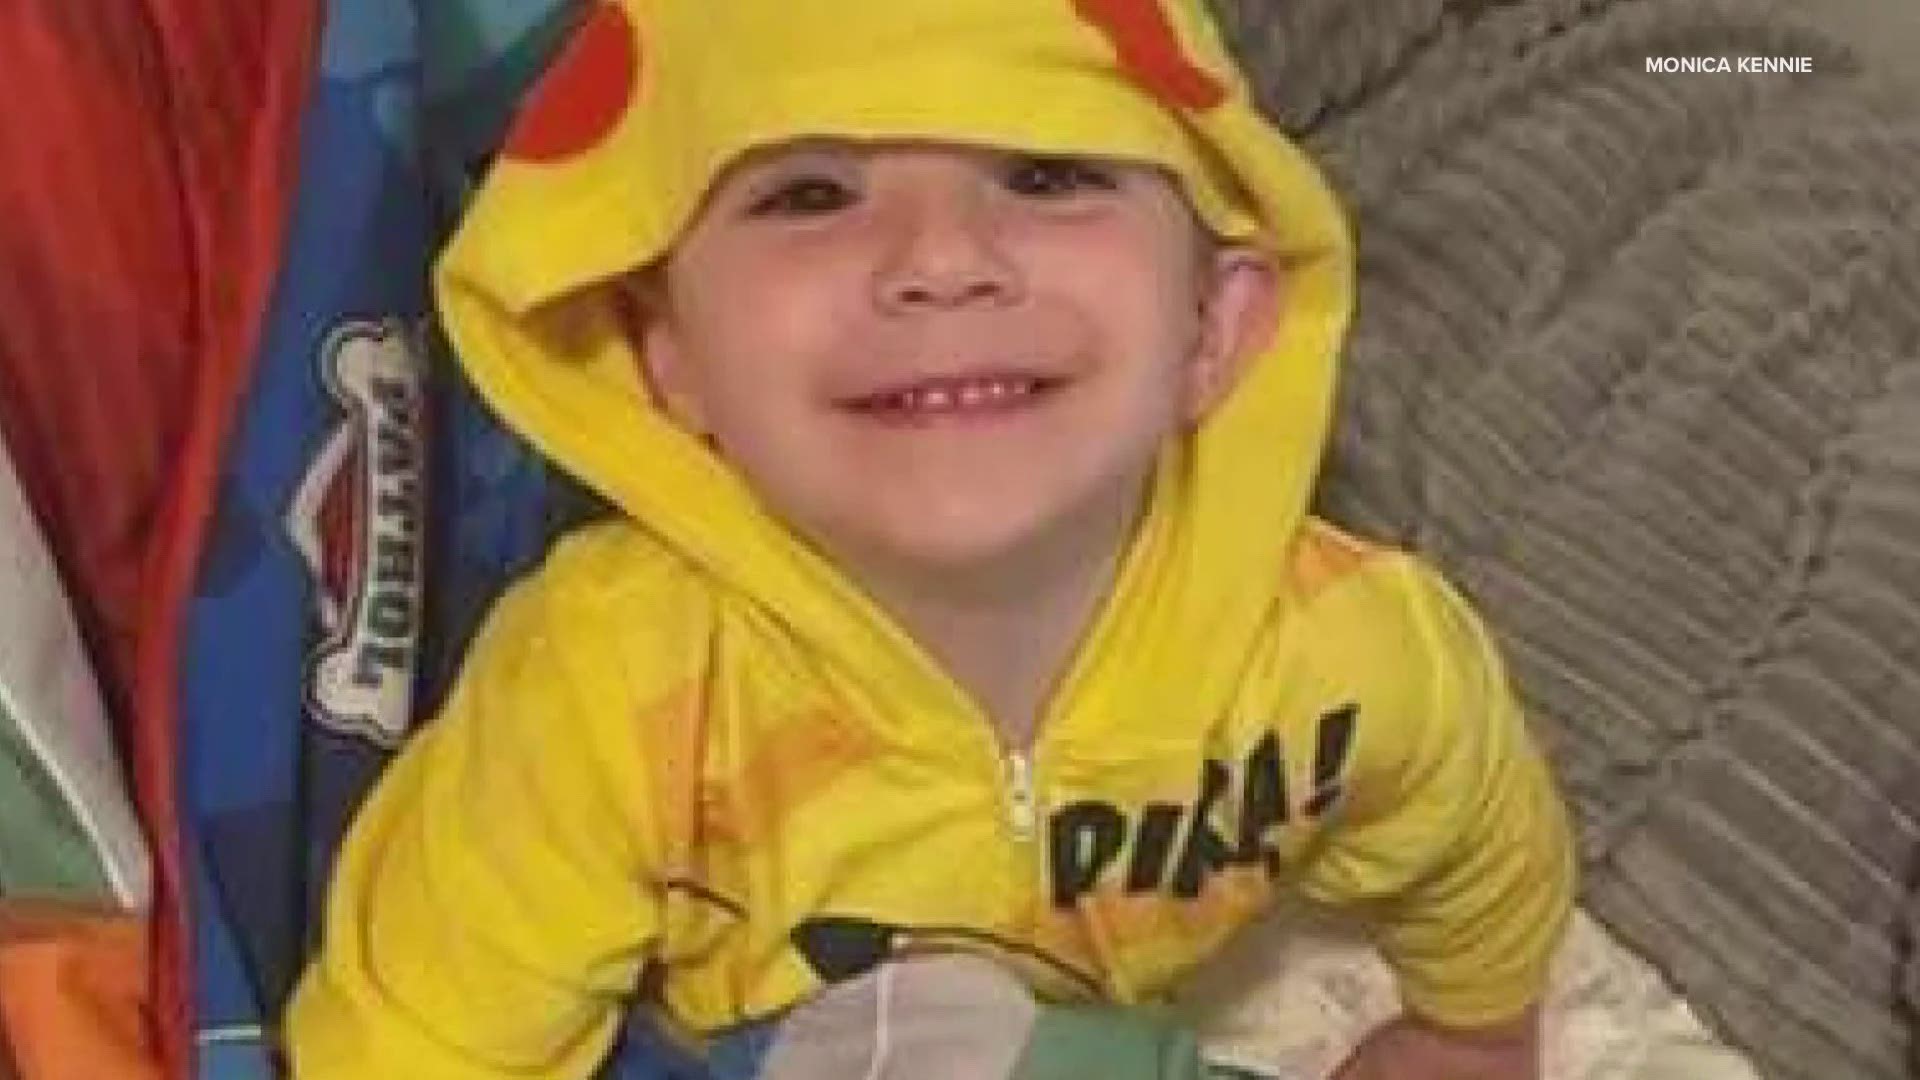 One week ago, 3-year-old William Tinkham, was struck and killed by an SUV outside his home.